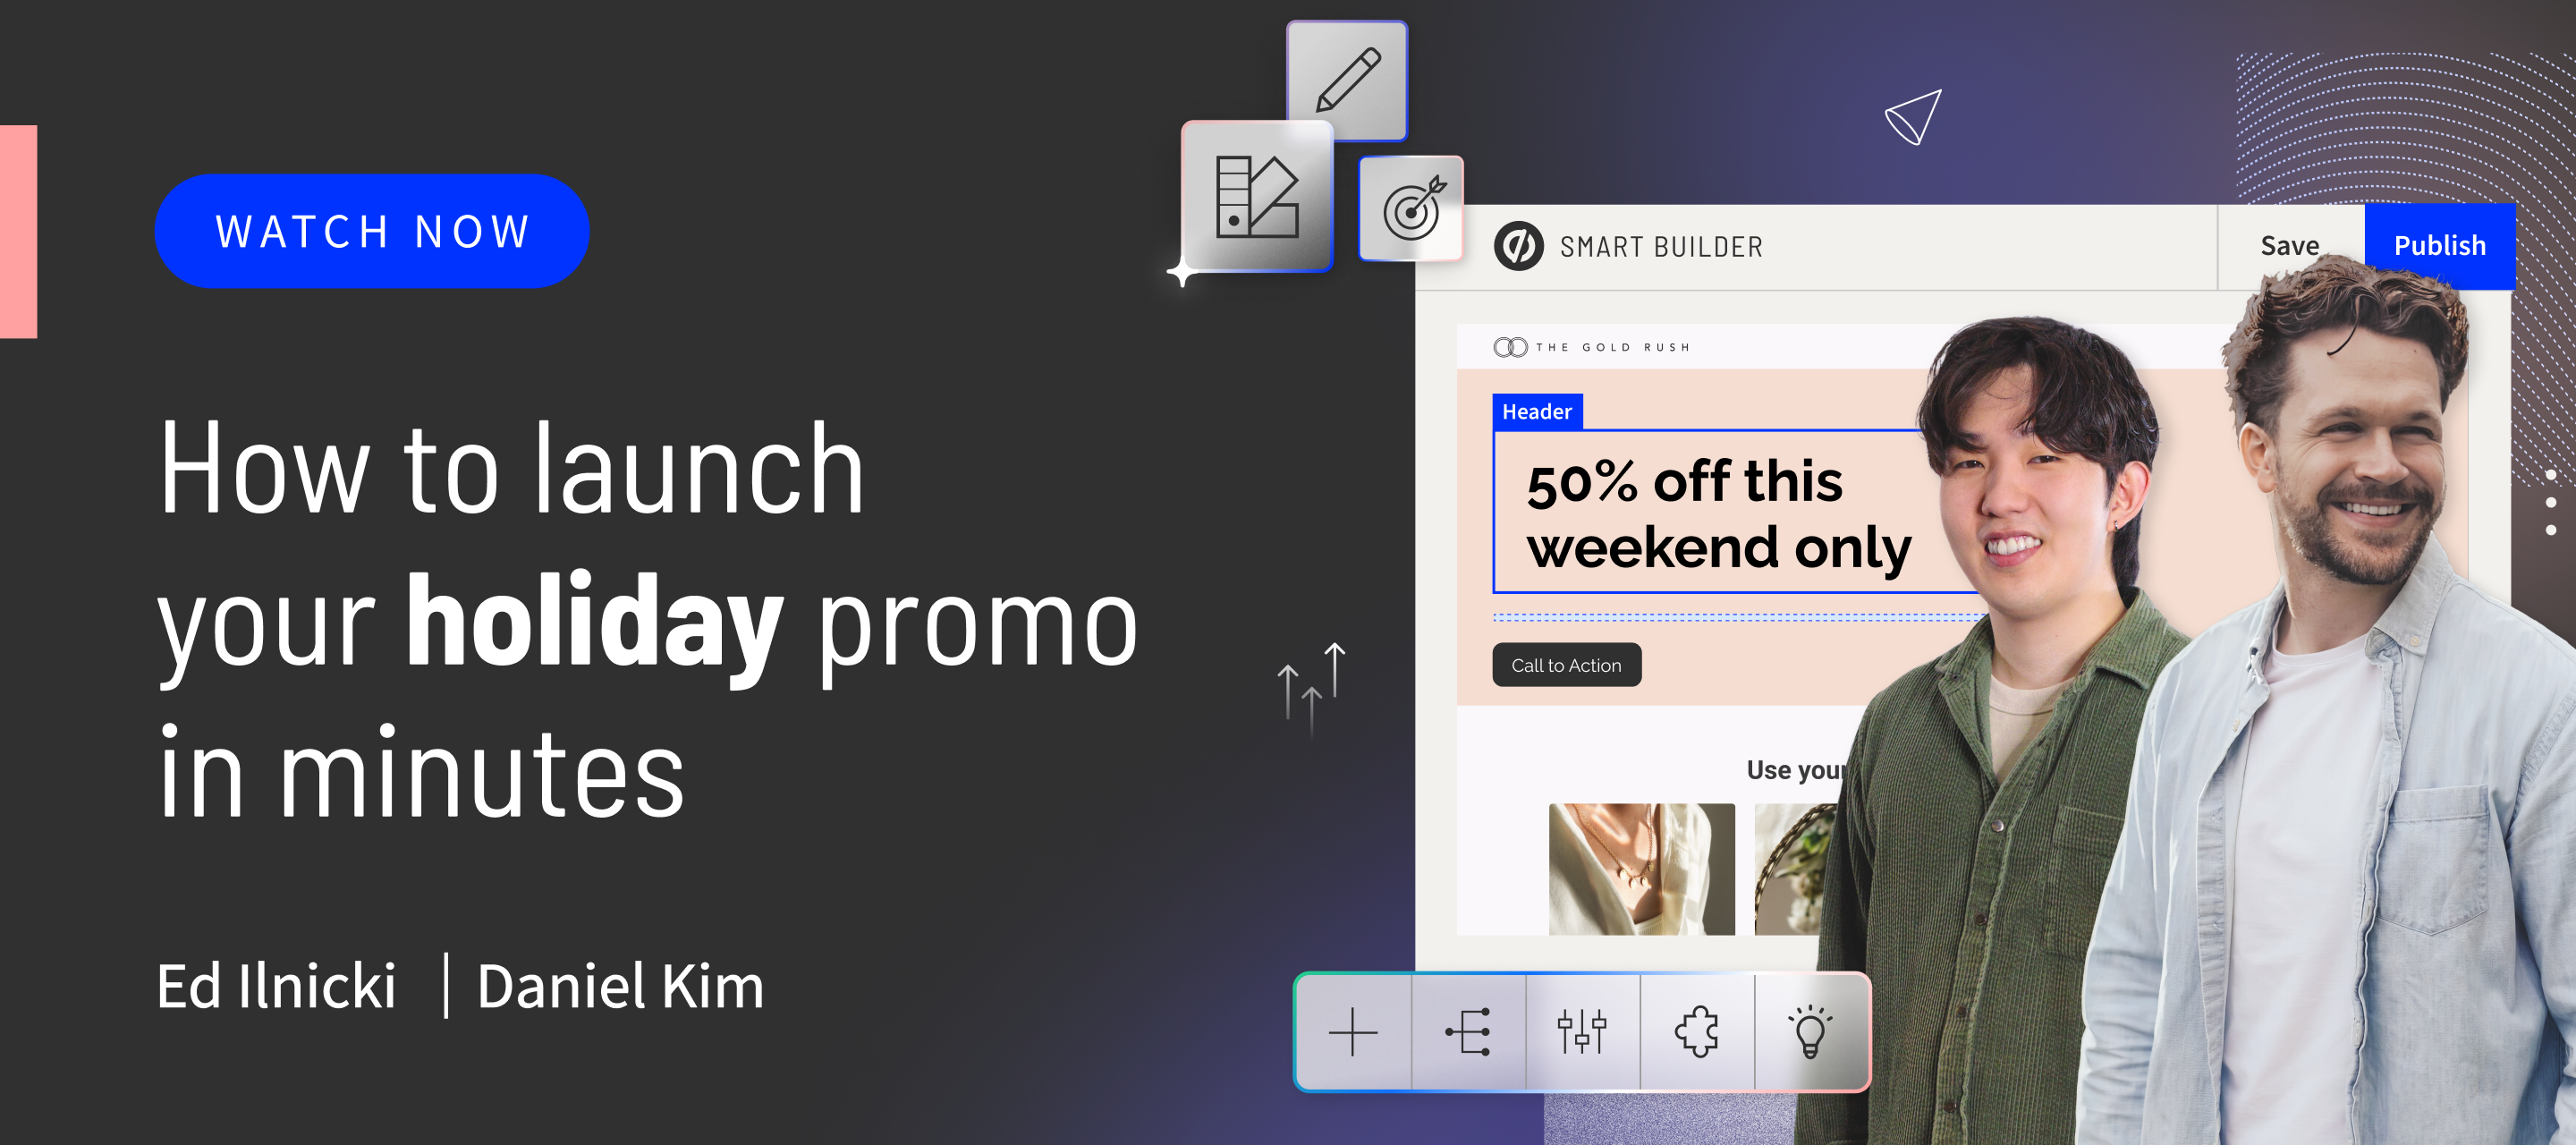 Watch—Launch your holiday promo in minutes (live demo)